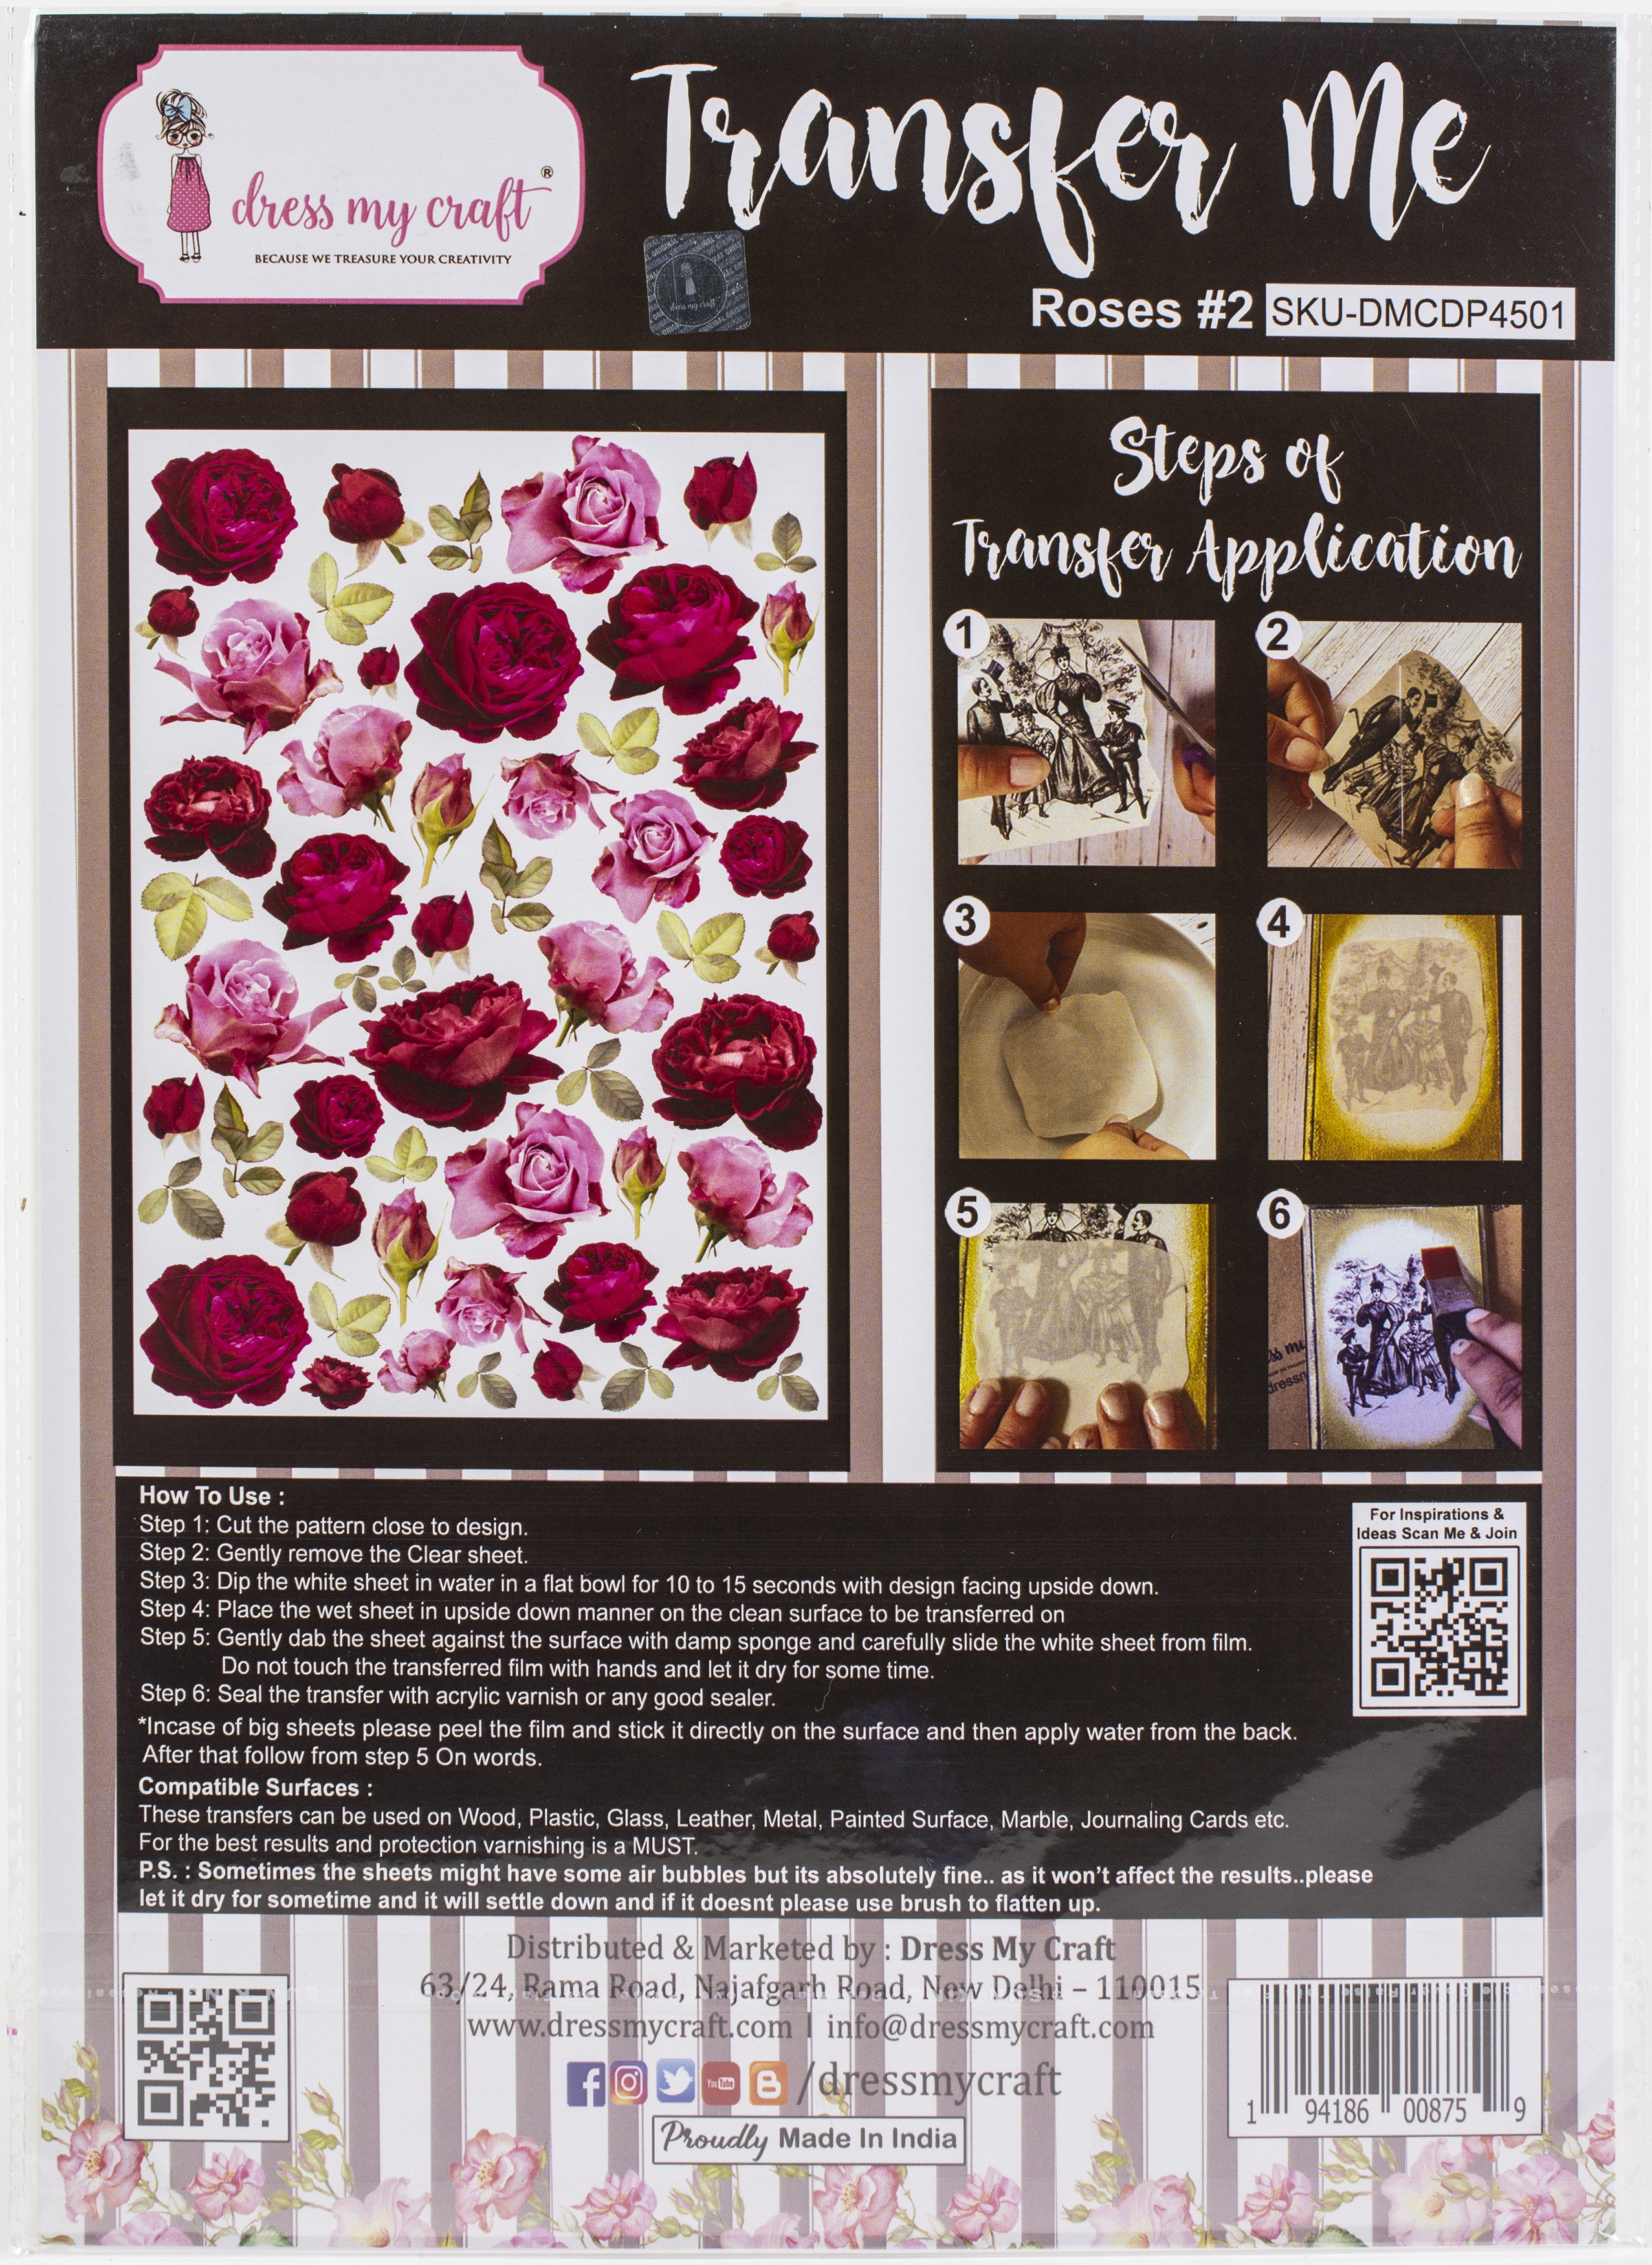 Dress My Craft-Dress Craft Transfer Sheet Me A4-Roses Chicago Mall Max 72% OFF #2